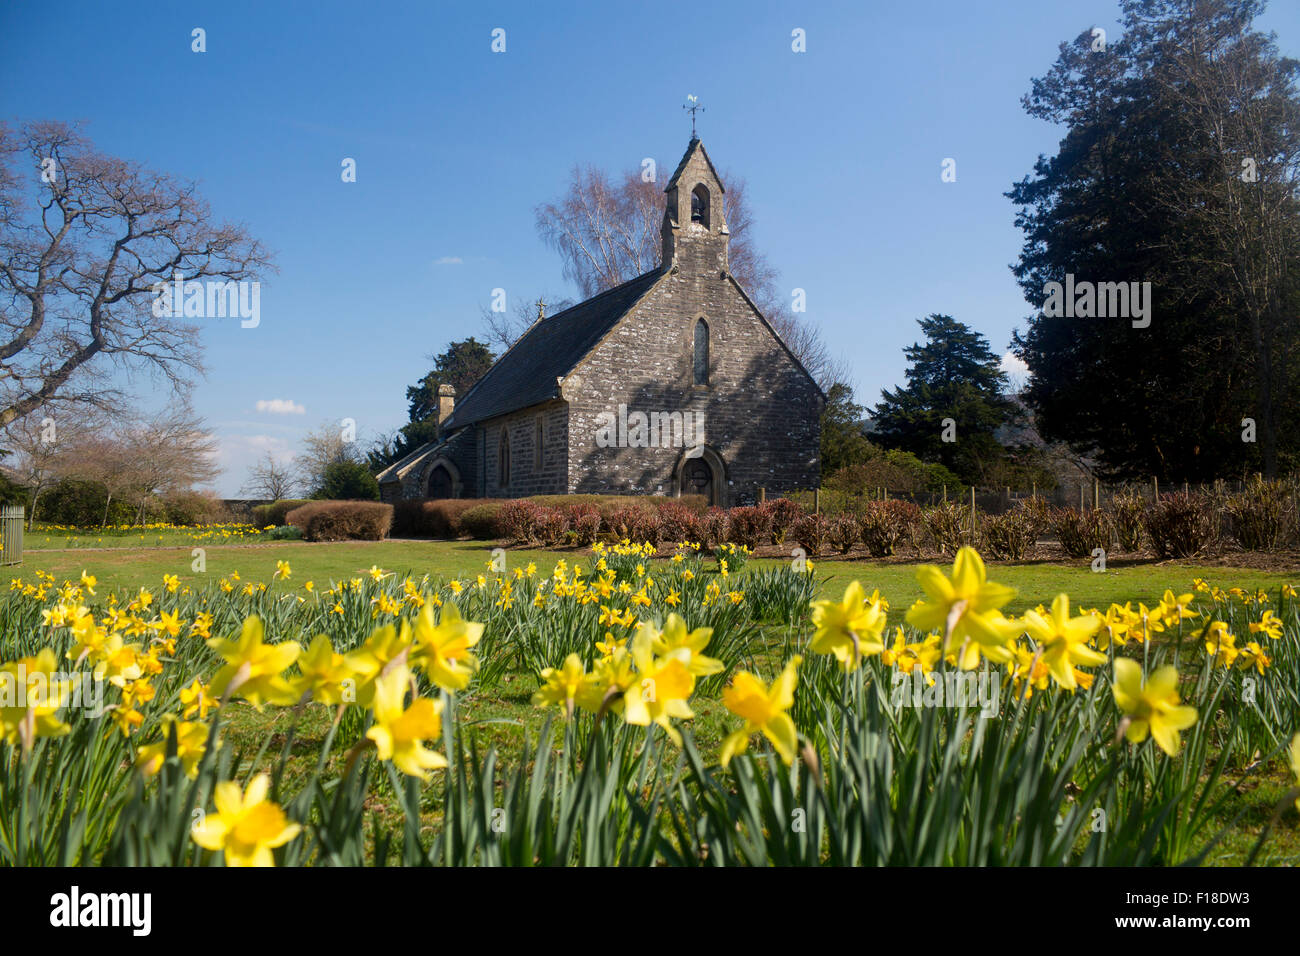 Capel Rug Rug Chapel with daffodils in foreground Near Corwen Denbighshire North East Wales UK Stock Photo